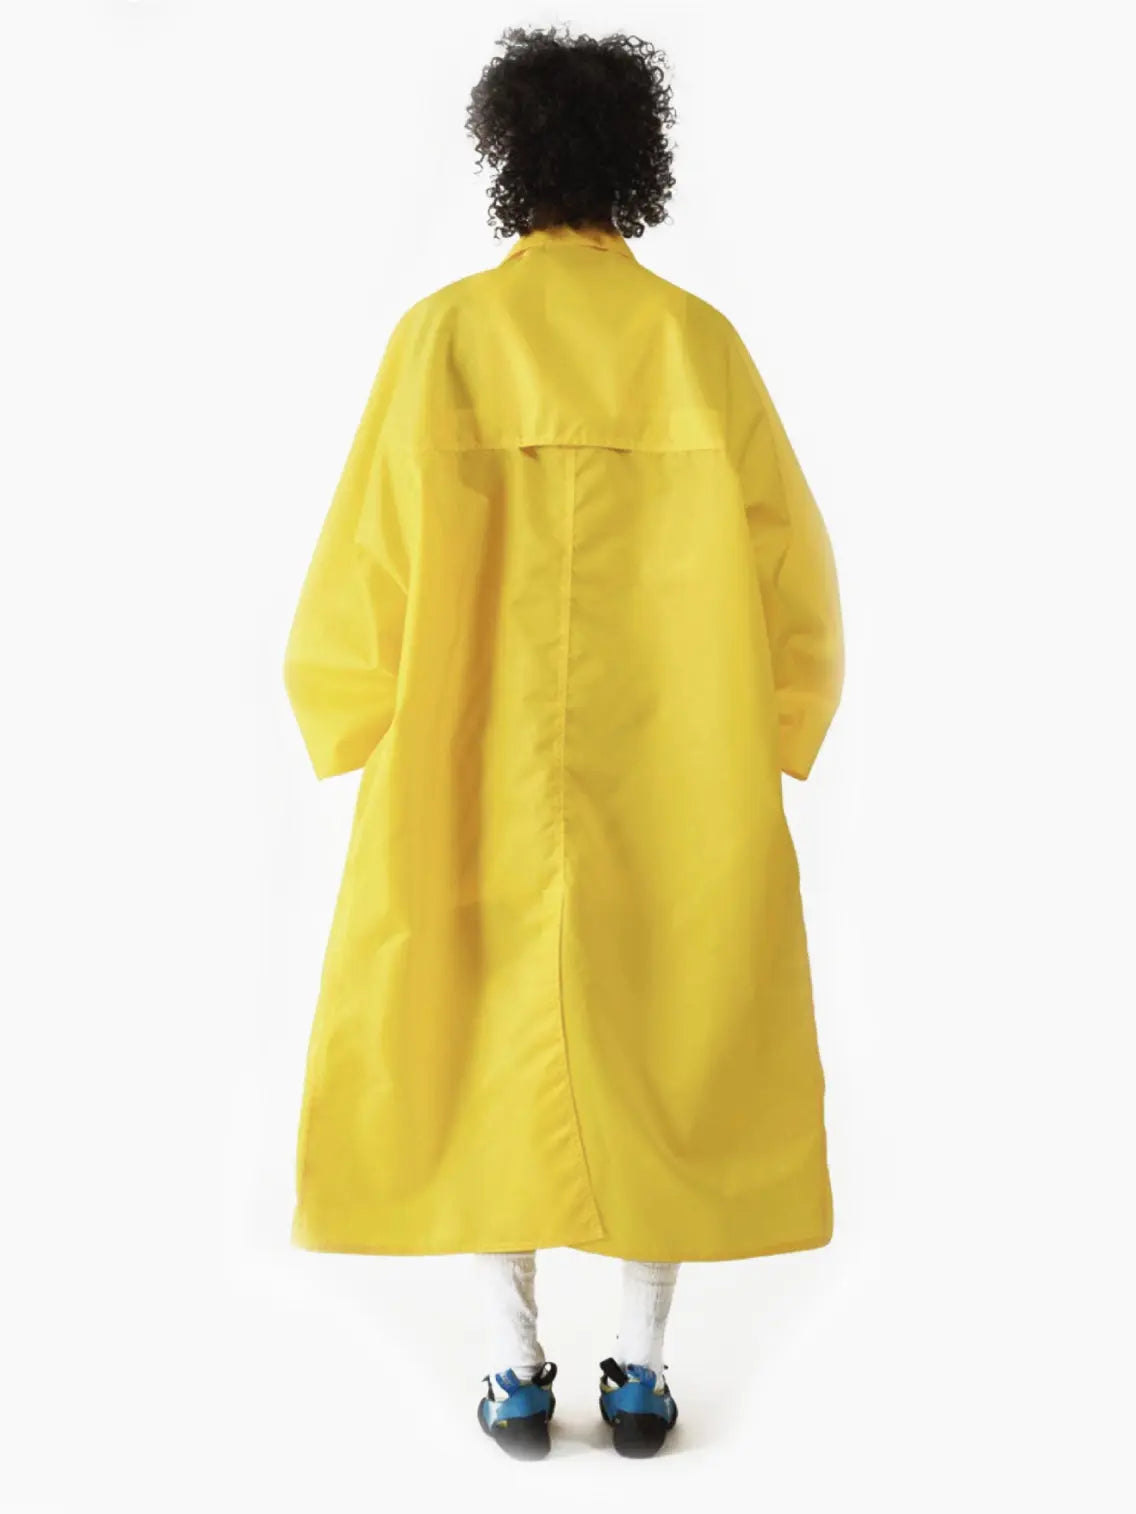 A person with short, curly hair is wearing a long, oversized Kim Long Coat Yellow by Bielo that reaches below the knees. They are standing against a plain white background, with hands in the coat pockets, revealing a hint of a striped outfit underneath—perfectly suited for strolling through Barcelona or visiting Bassalstore.